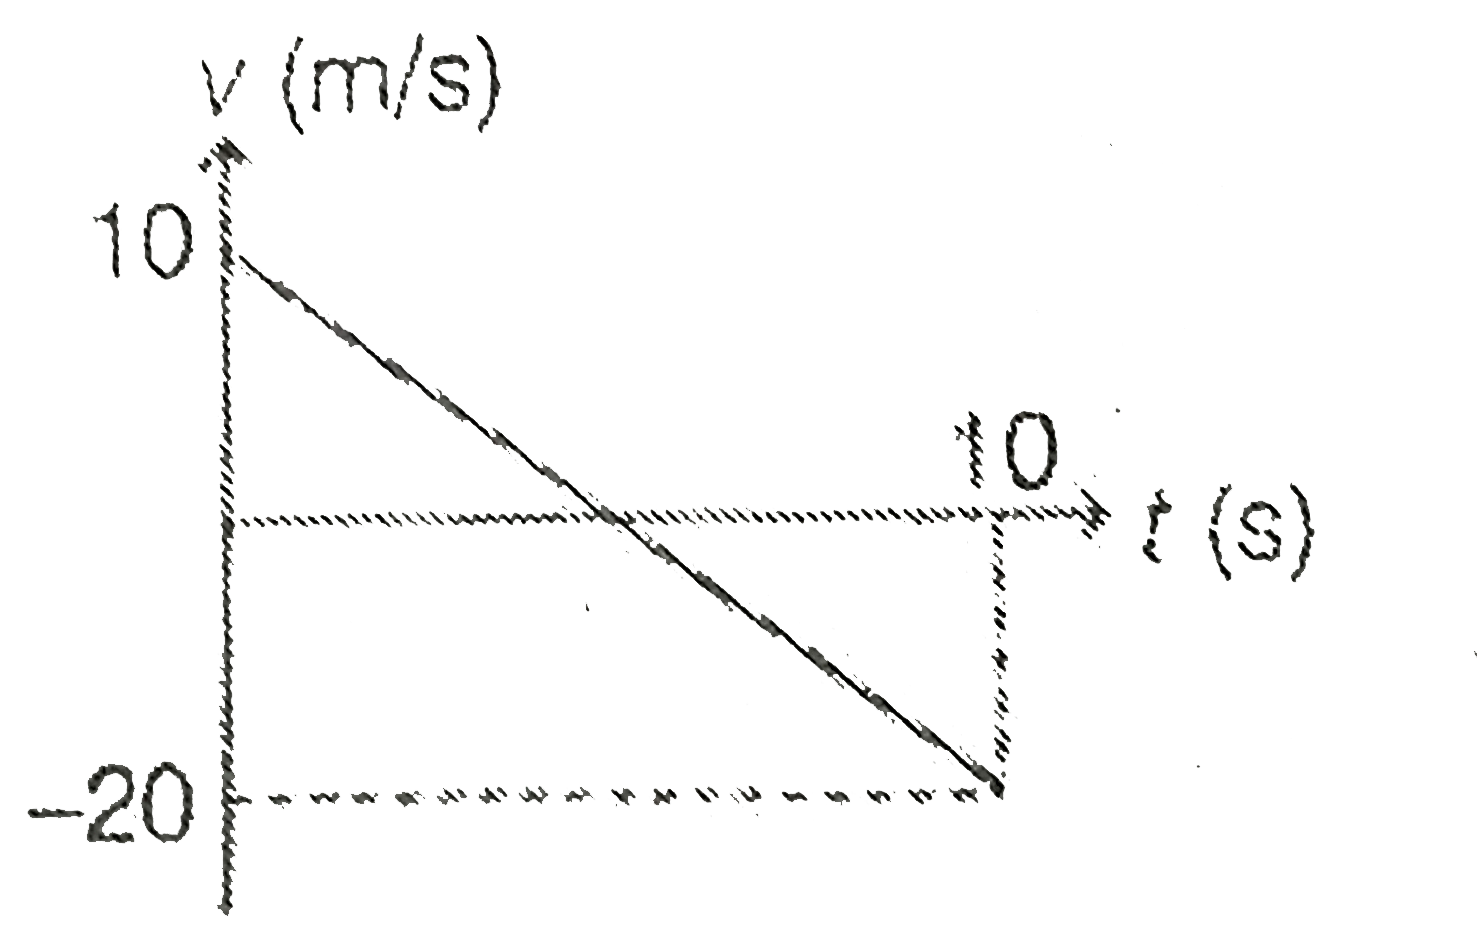 Velocity-time graph of a particle moving in a straight line is as shown in figure. Mass of the particle is 2 kg. Work done by all the forces acting on the particle in time interval between t = 0 to t = 10 s is